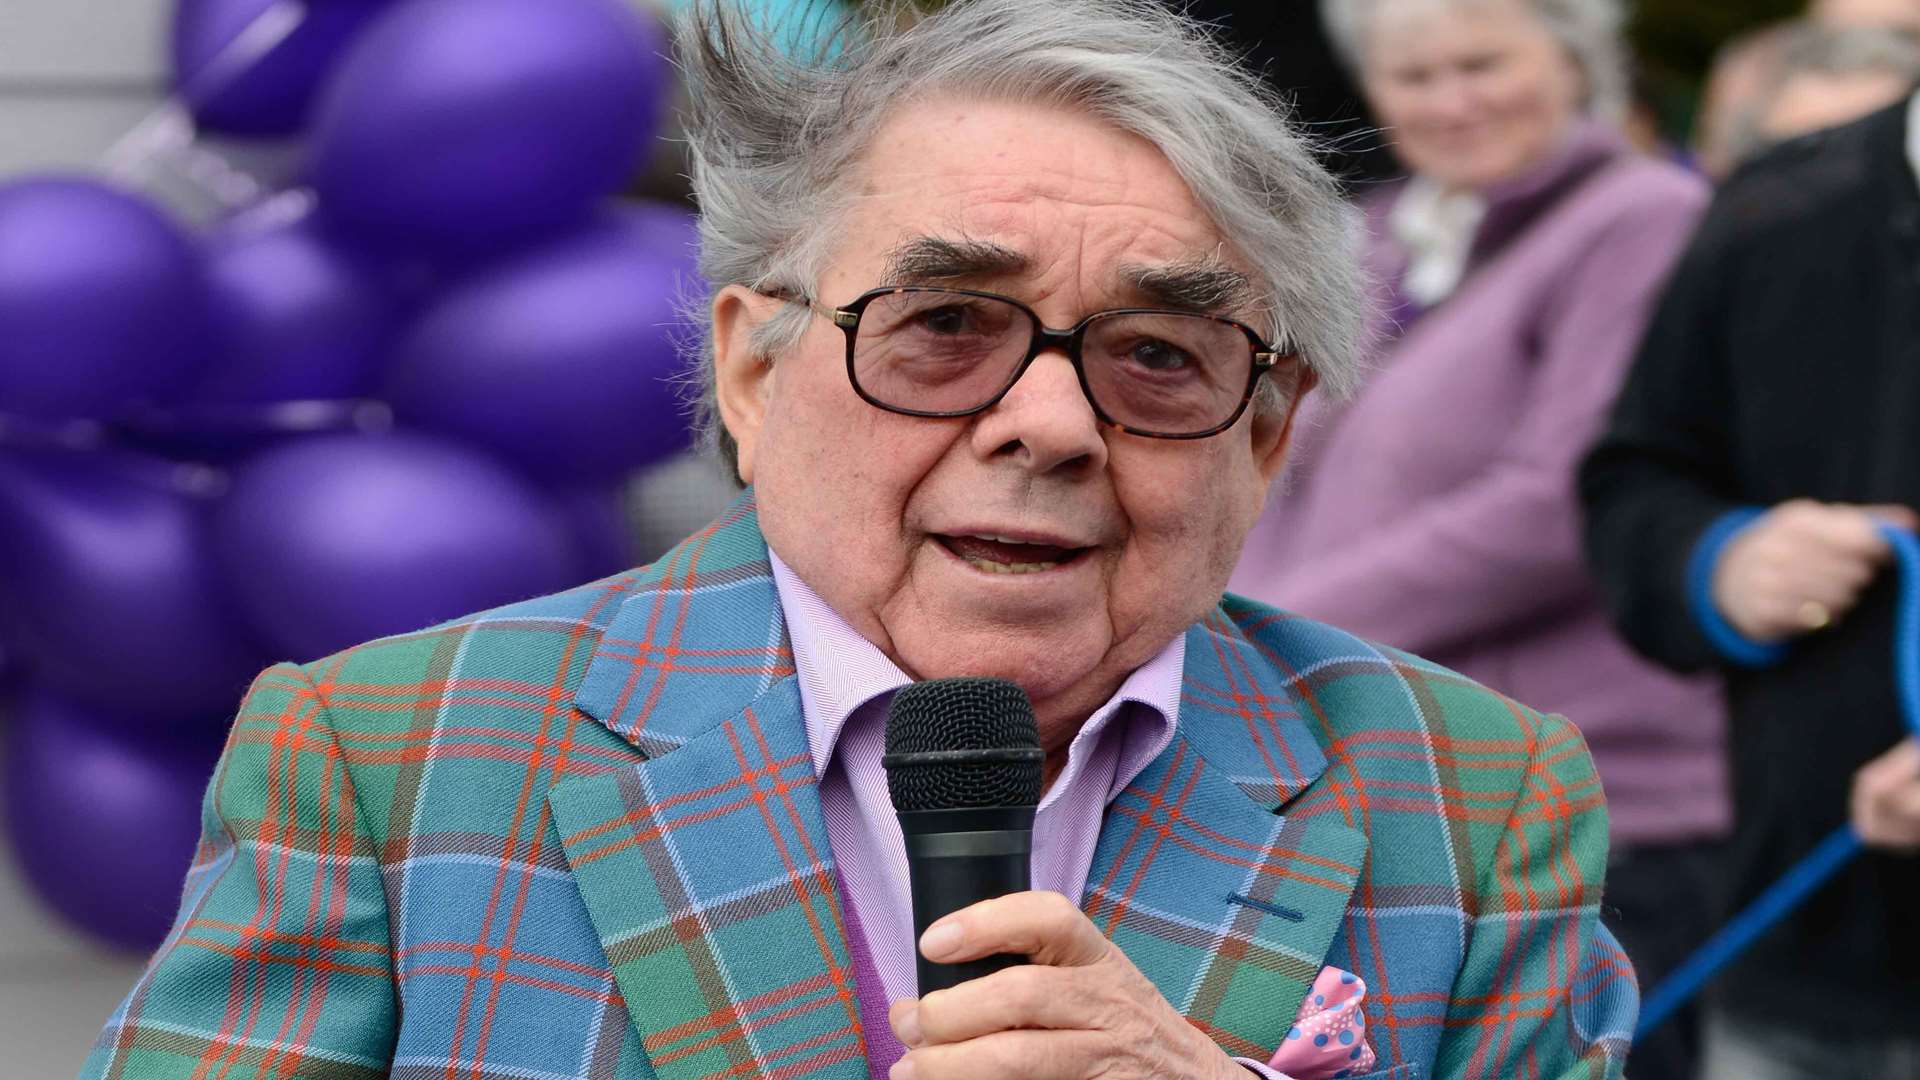 Ronnie Corbett at the opening of an animal sanctuary in Kent last year